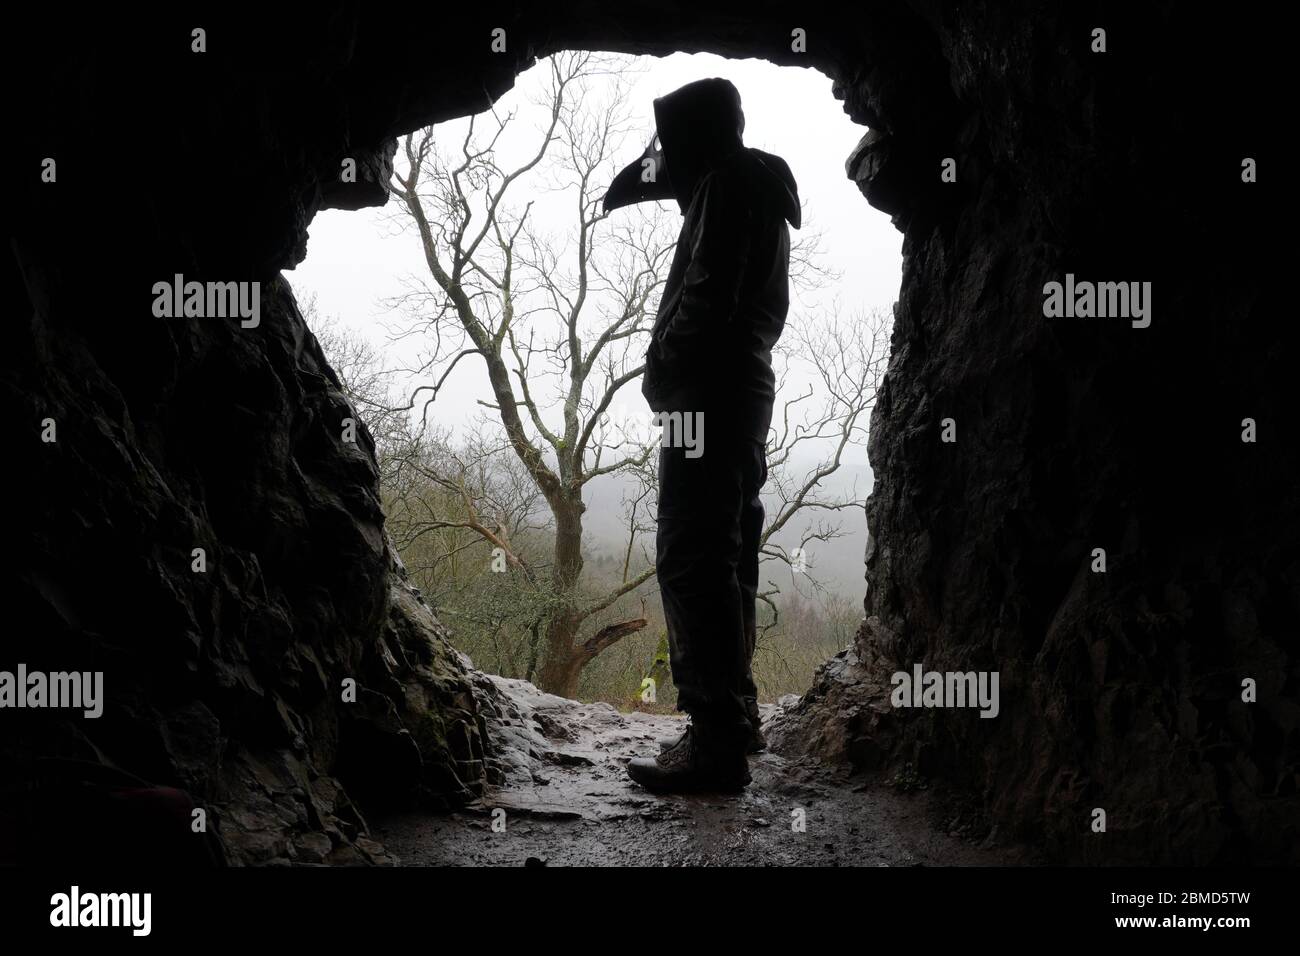 A scary, hooded figure wearing a plague doctor mask, standing in the entrance of a cave on a misty winters day Stock Photo